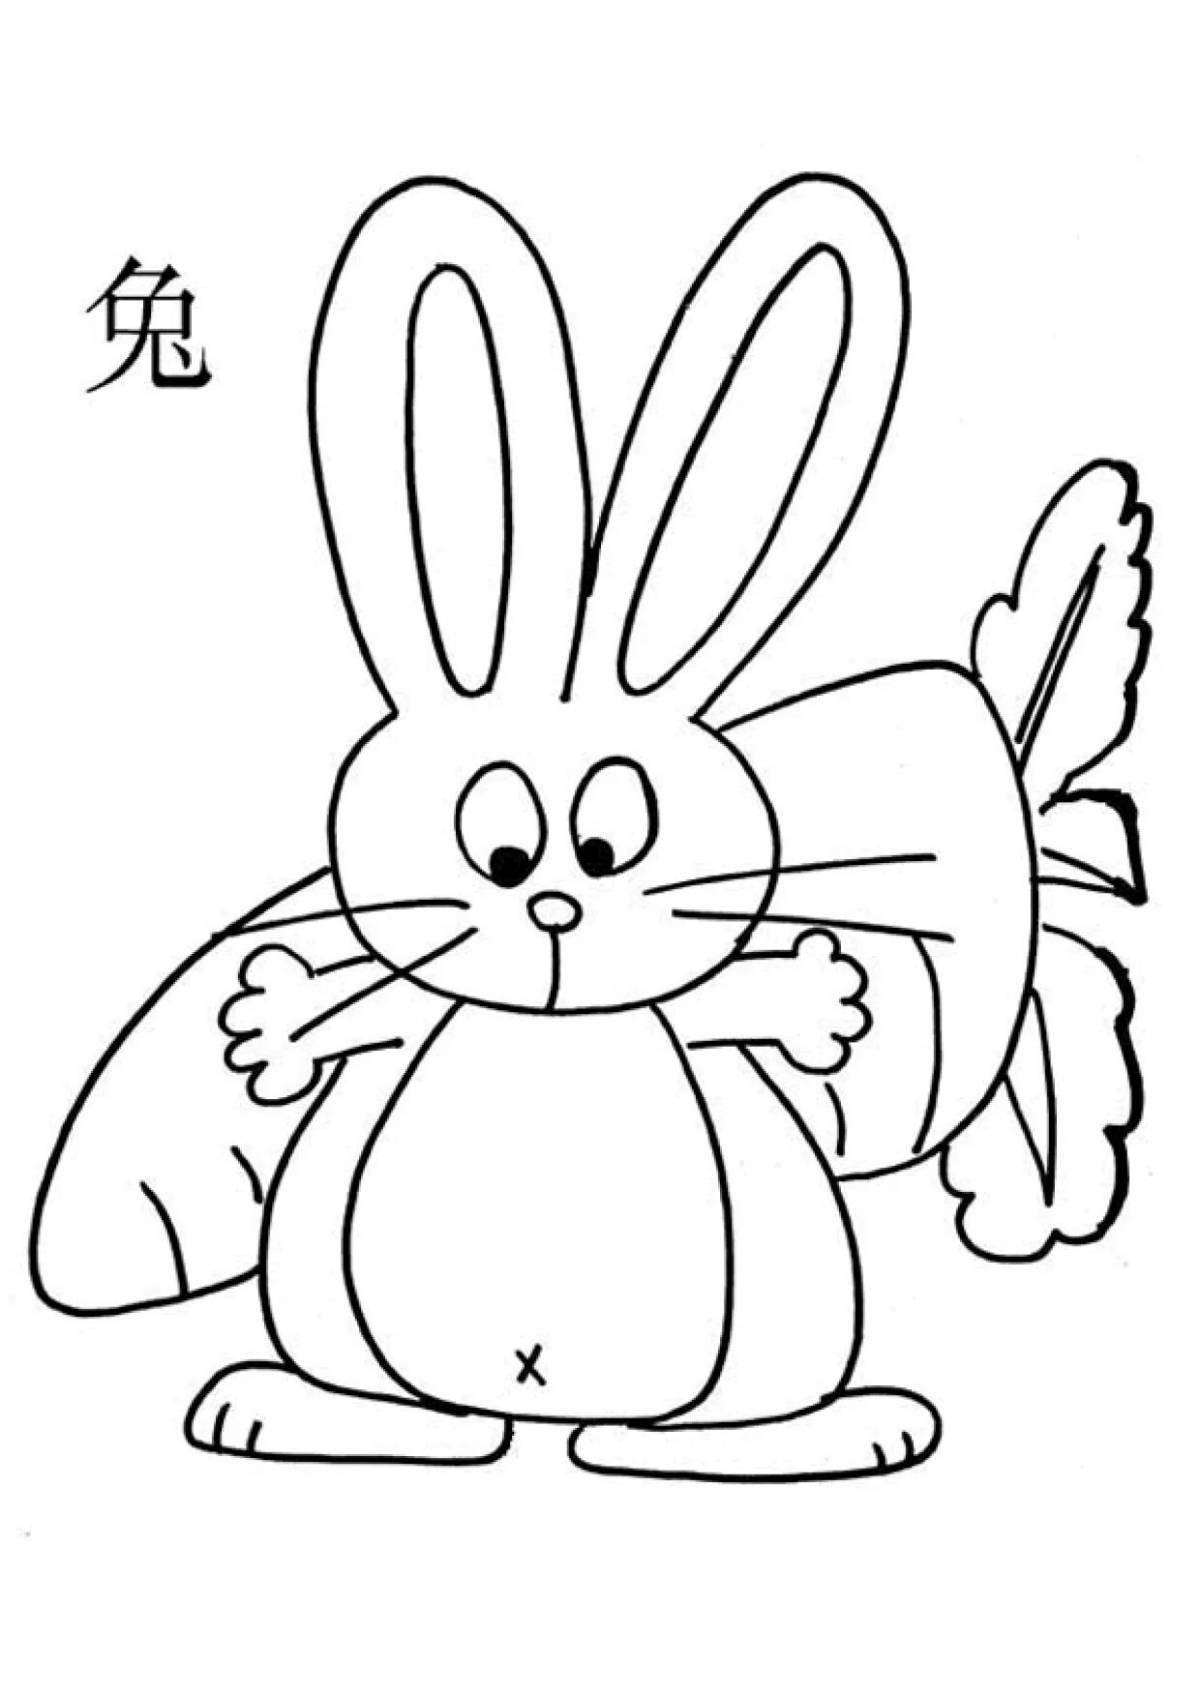 Adorable coloring book Bunny with a bow